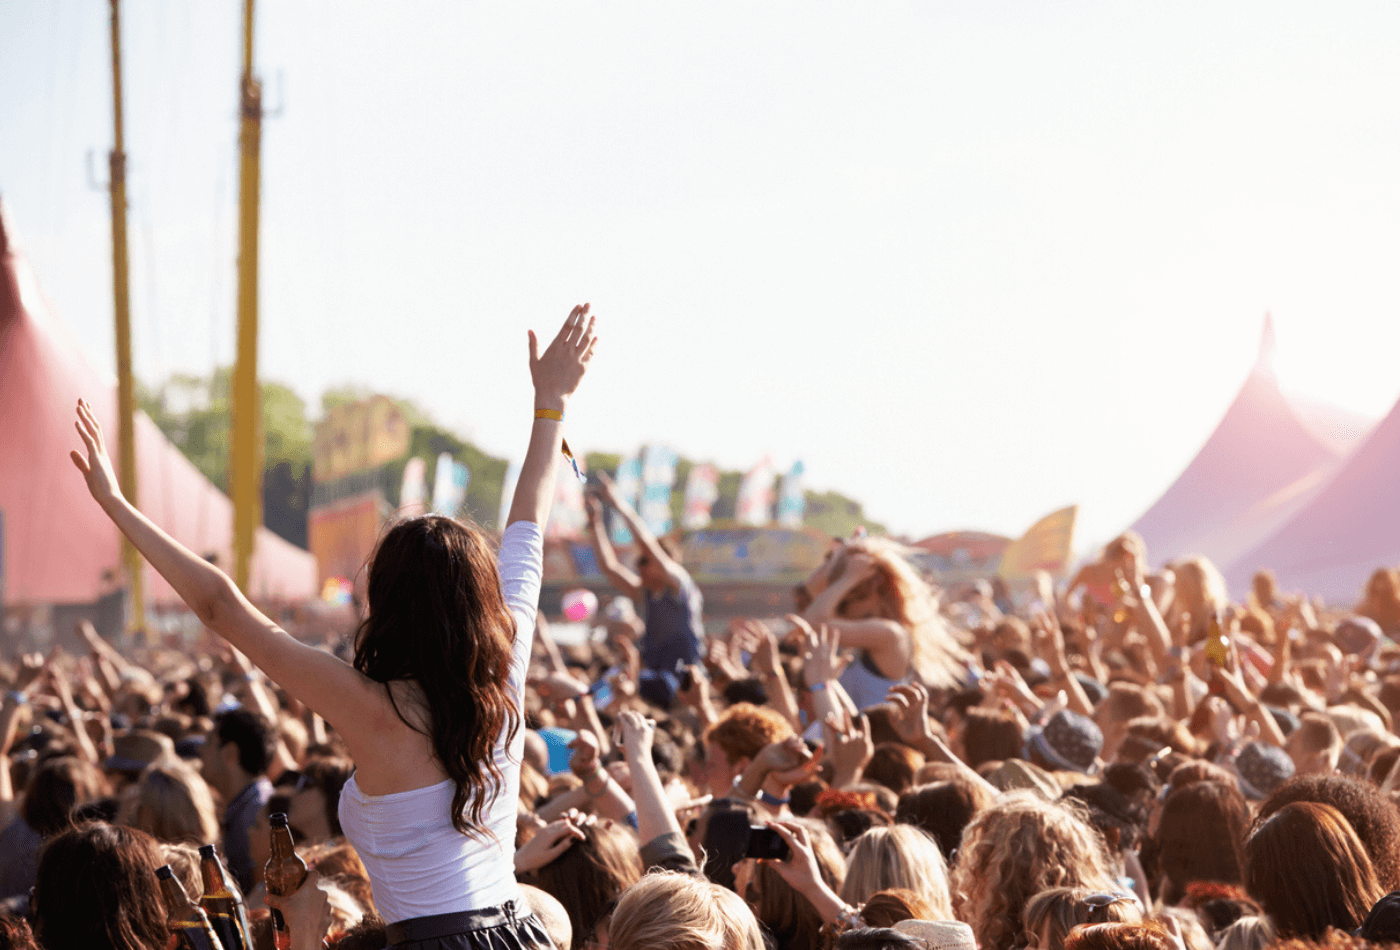 Crowds Enjoying Themselves At Outdoor Music Festival With Arms in The Air